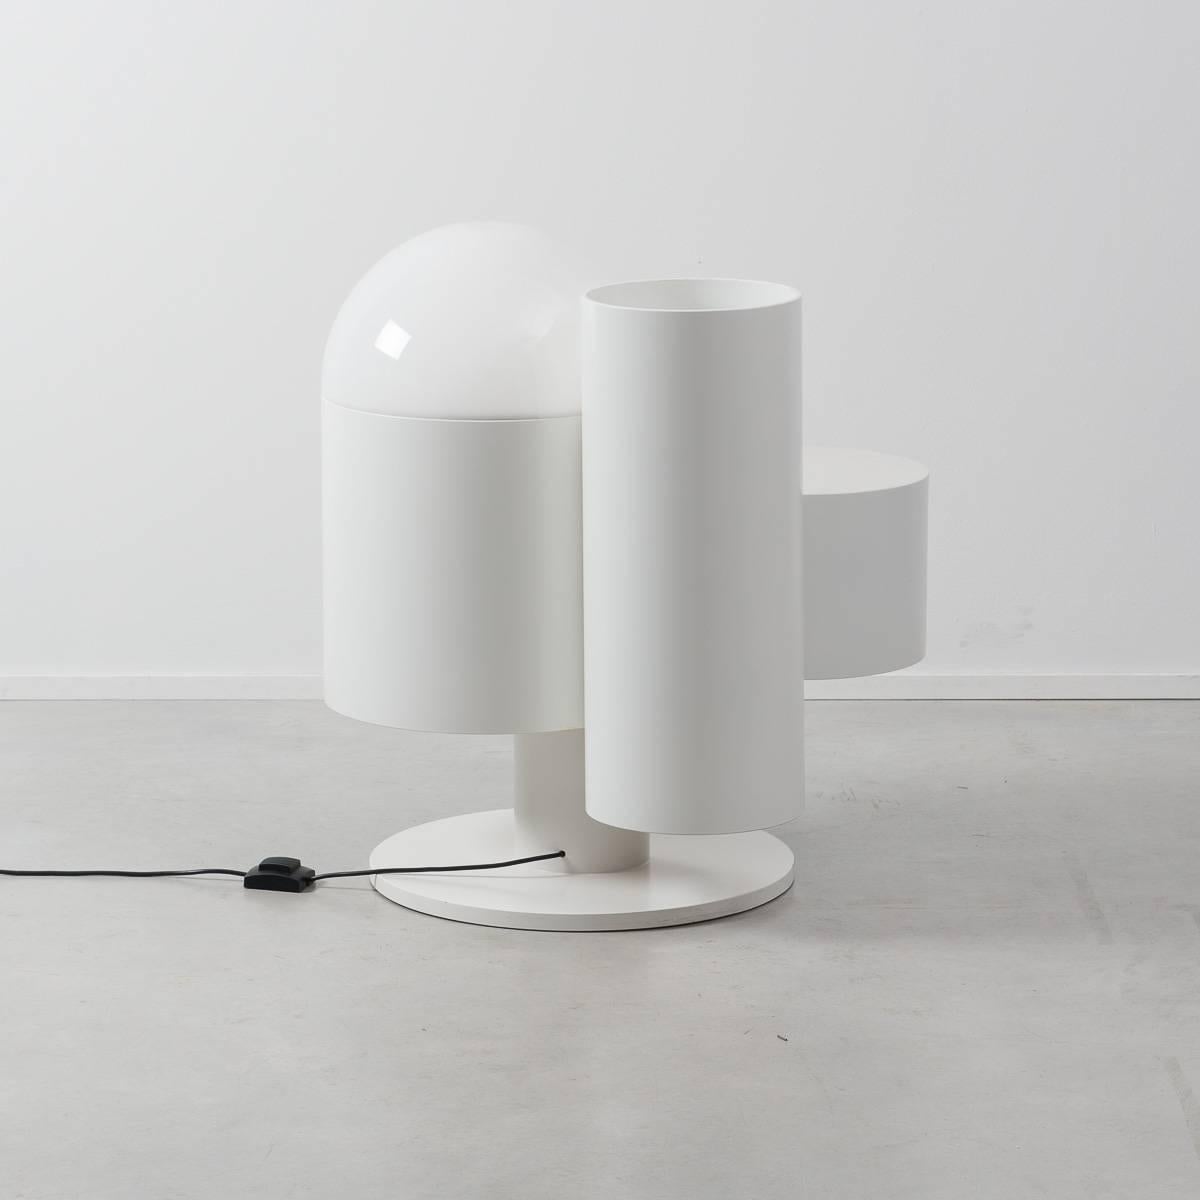 This eye-catching Kerst Koopman floor lamp with shelf and storage cylinder is made from lacquered wood with an acrylic lampshade. Its staggered cylindrical forms are playful yet its muted white tones are restrained, creating an interesting futurist